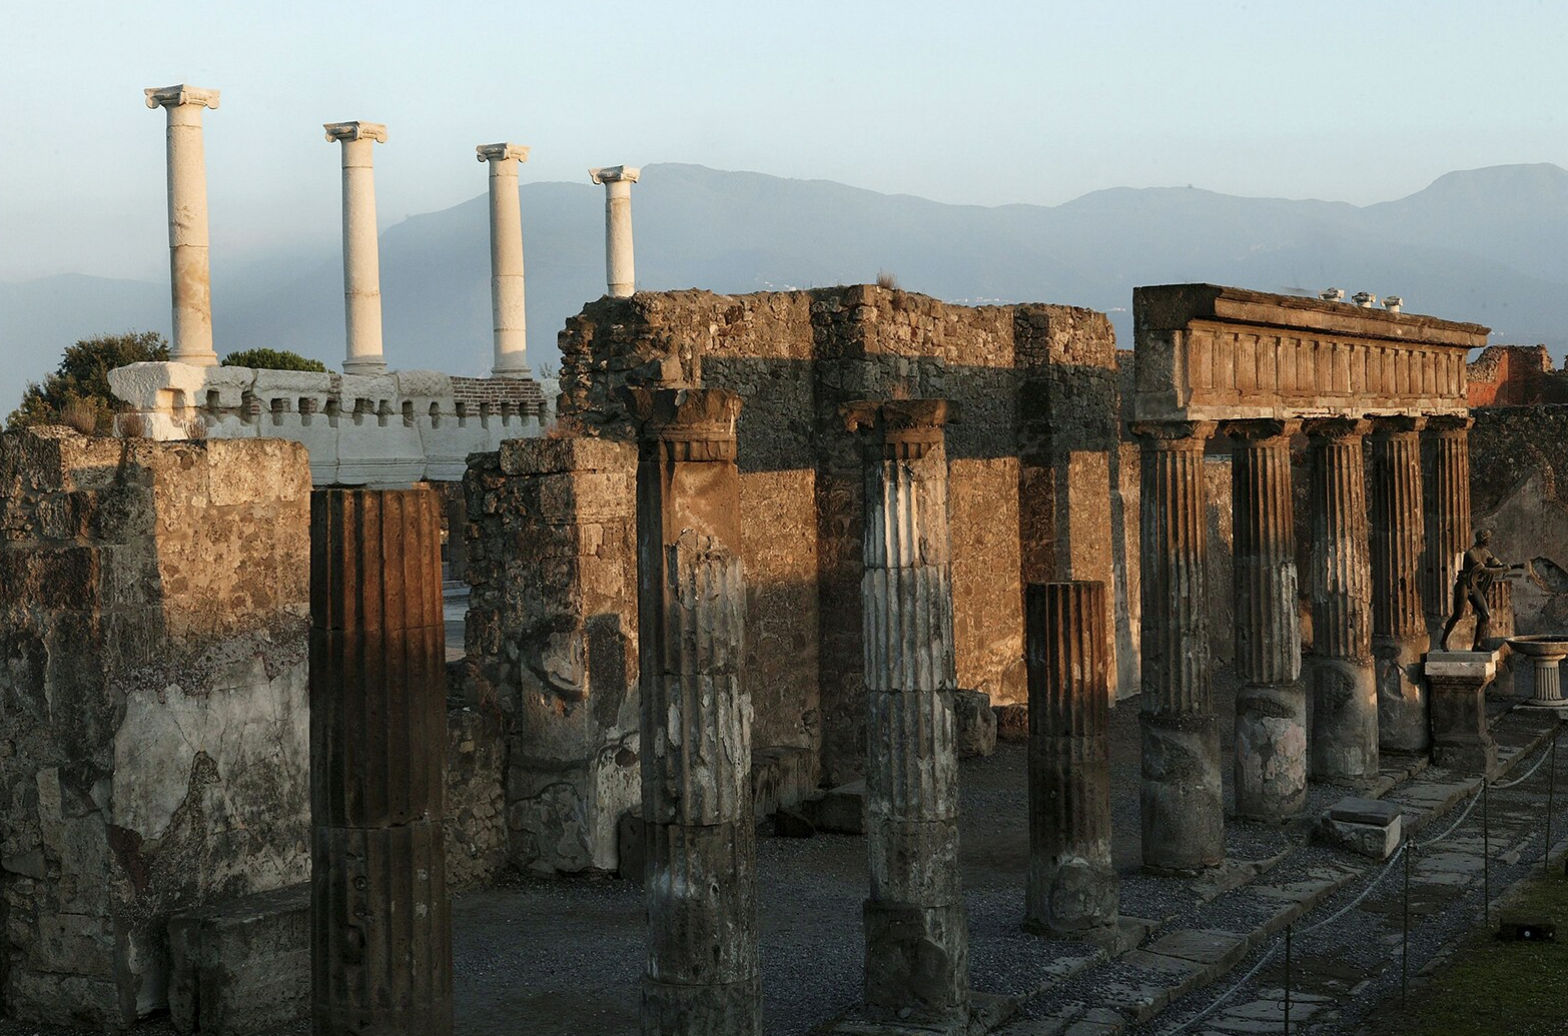 The ruins of a building with many pillars set against the backdrop of foggy mountains. 